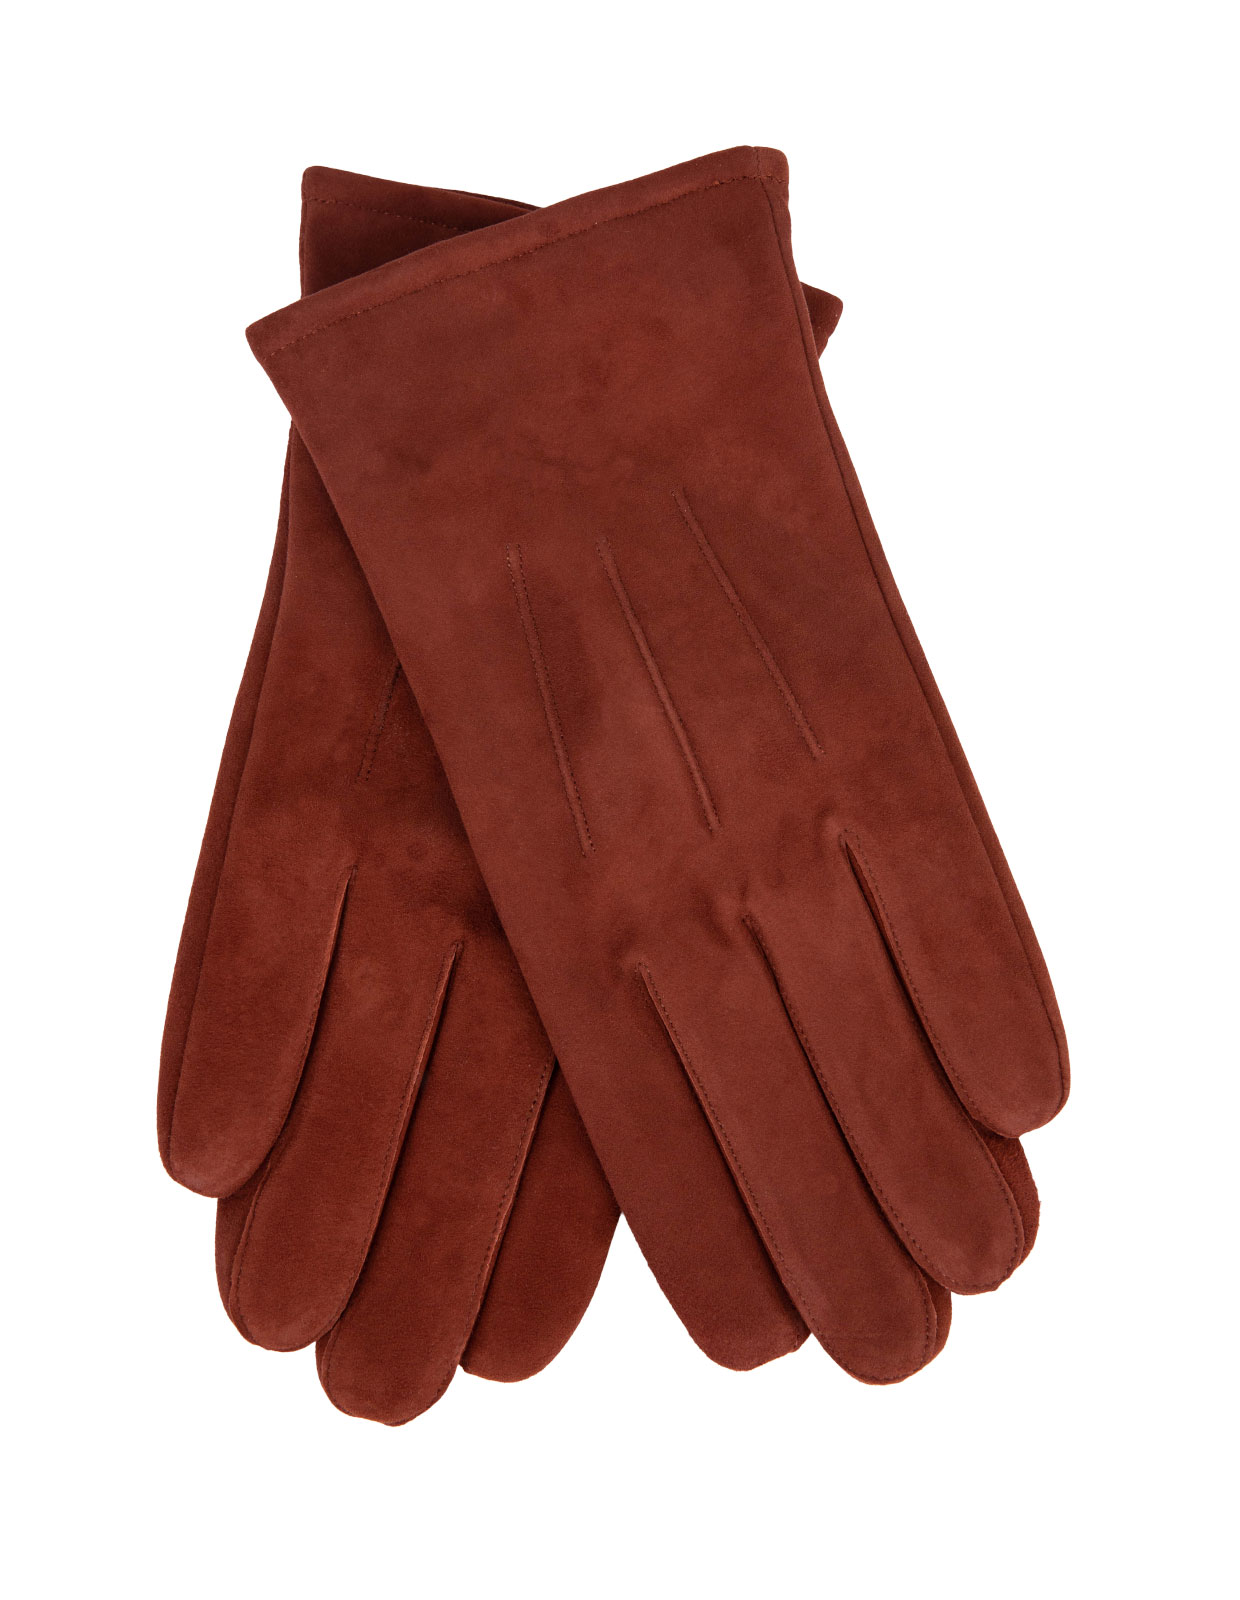 Classic Suede Gloves Red/Brown Stl 8.5